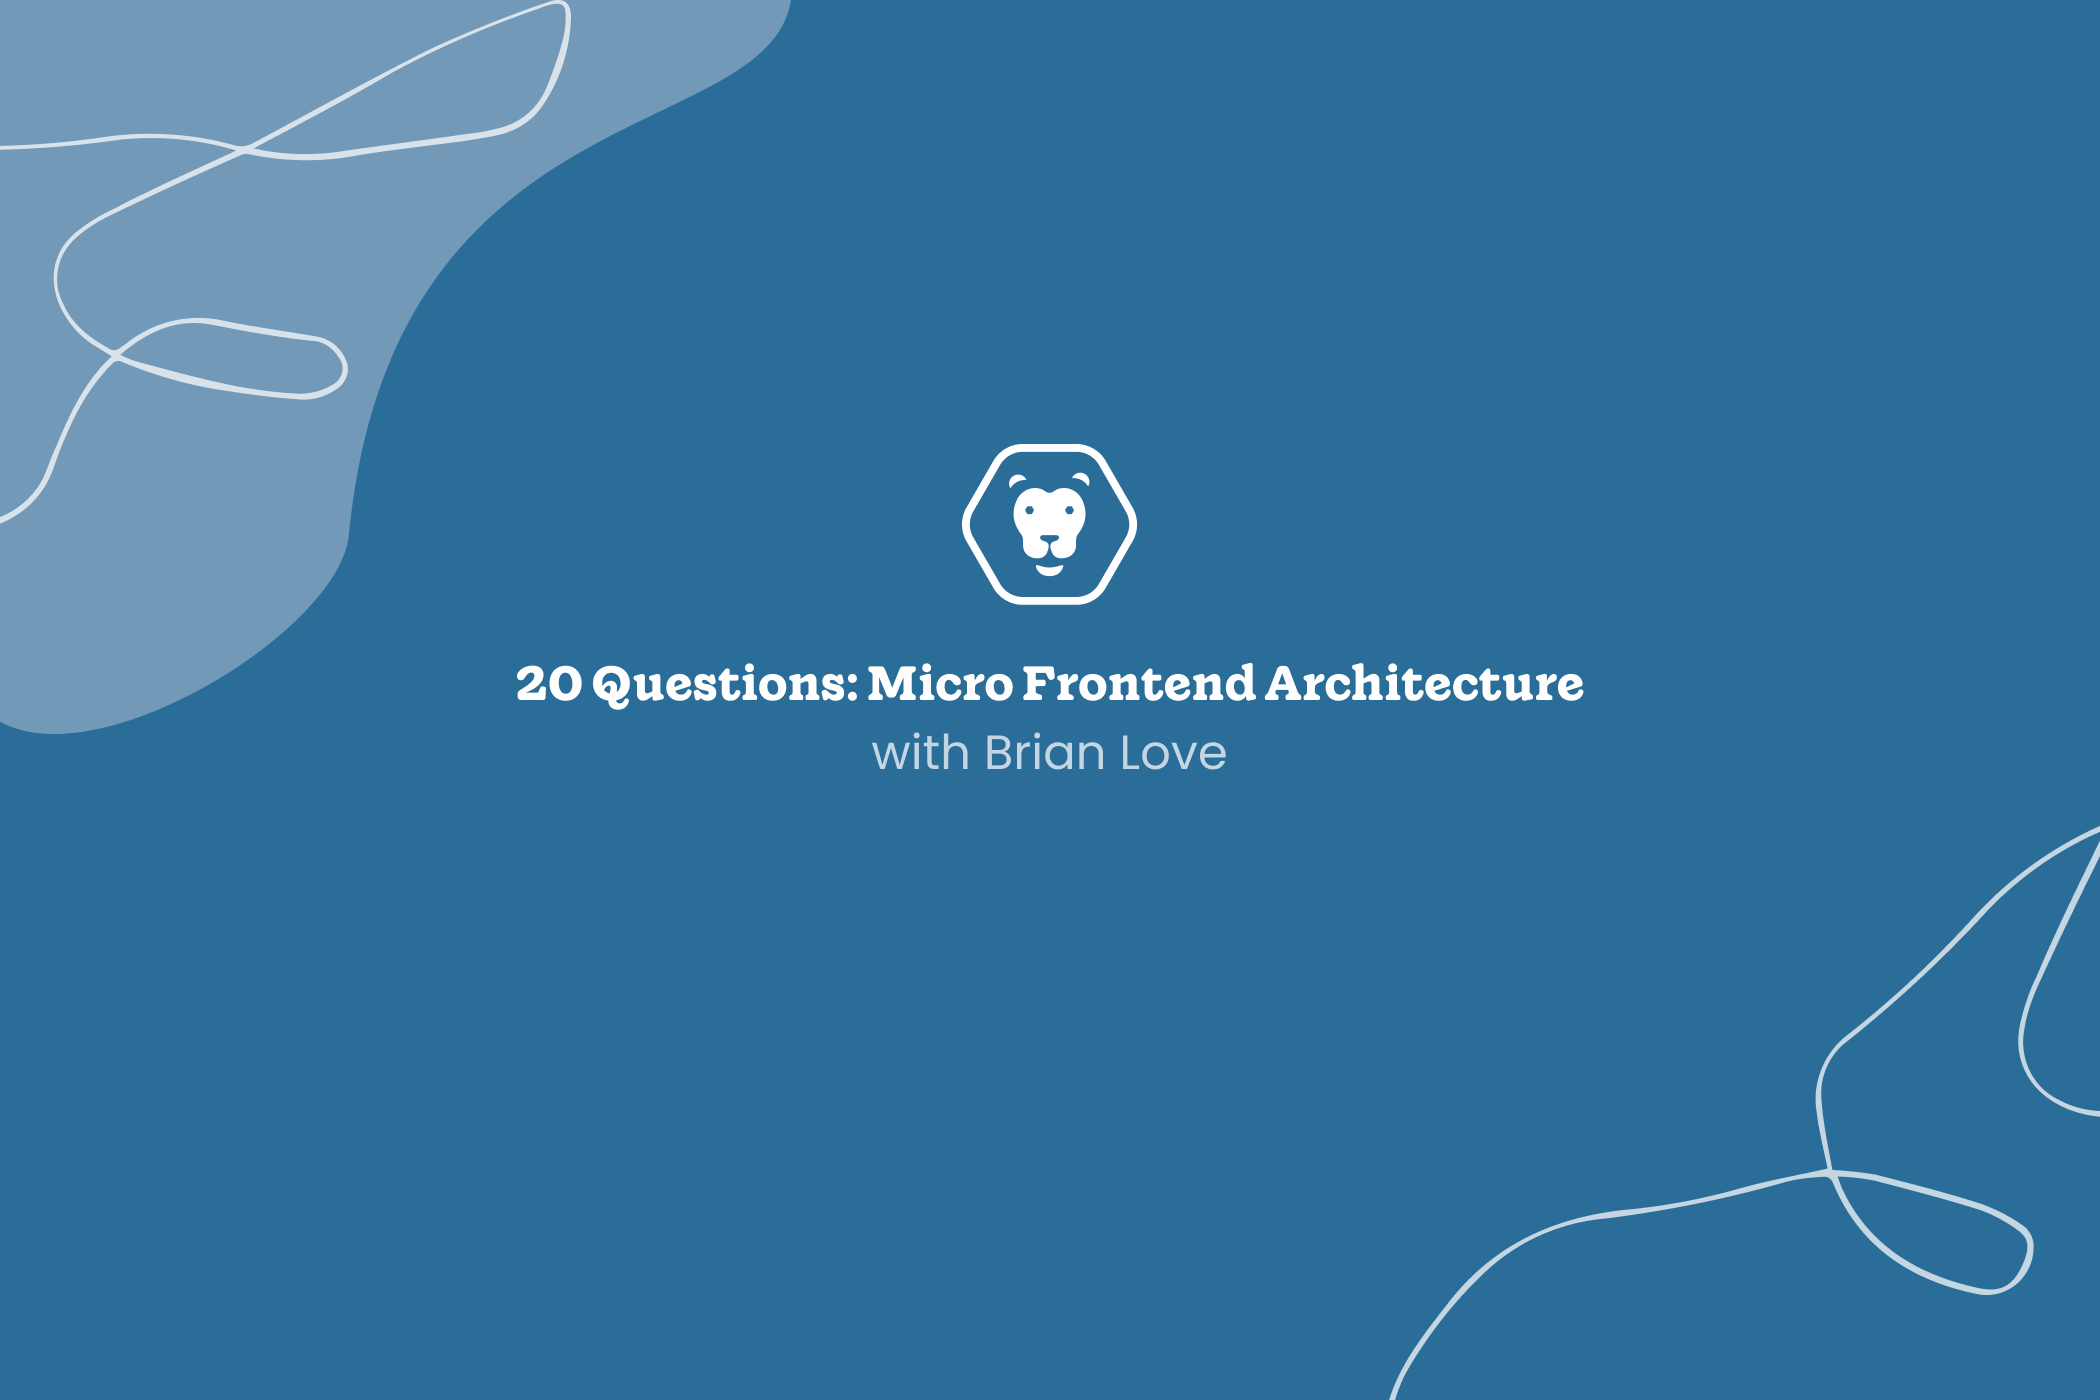 20 Questions on Micro Frontend Architecture